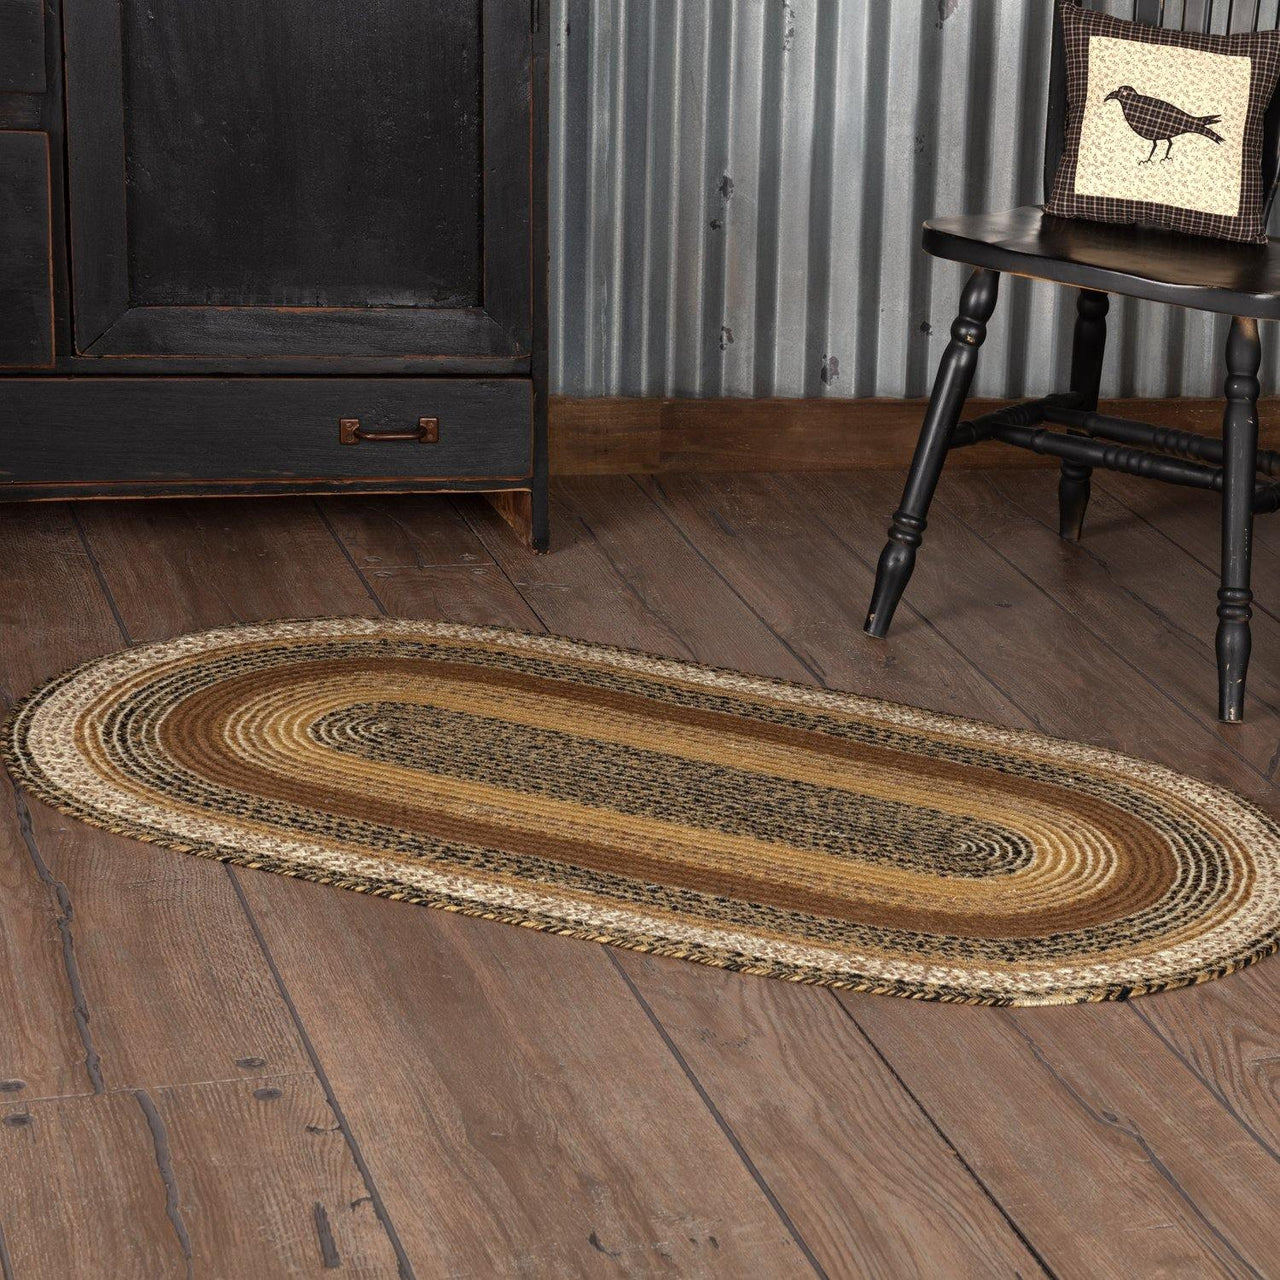 Kettle Grove Jute Braided Rug Oval 27"x48" with Rug Pad VHC Brands - The Fox Decor